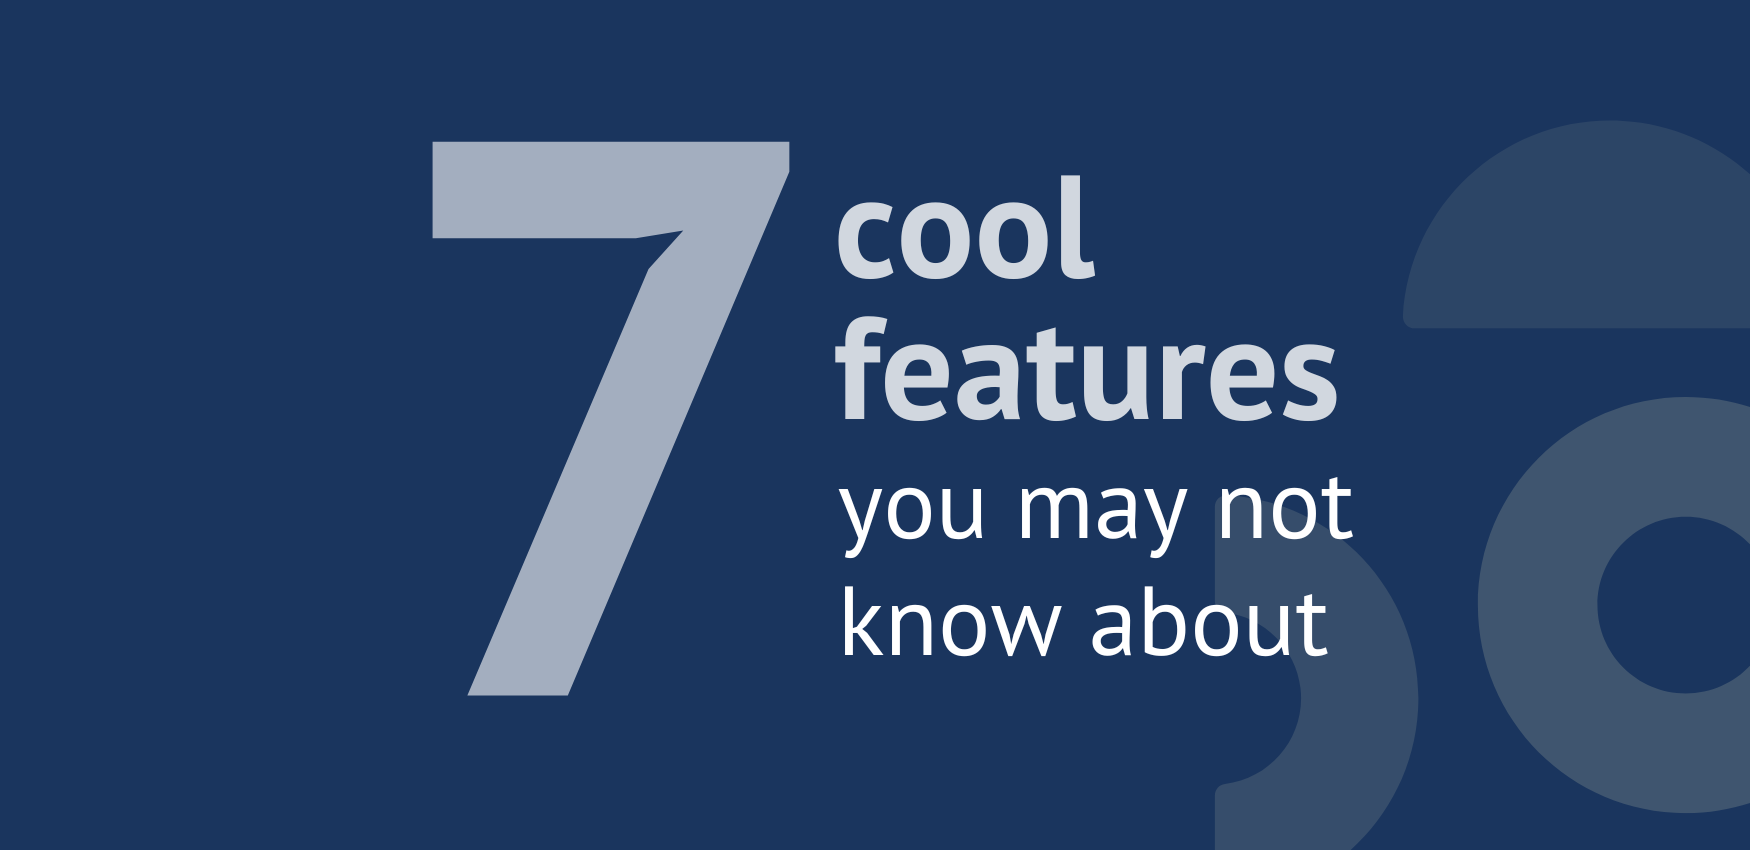 7 Cool Features in Passare You May Not Know About